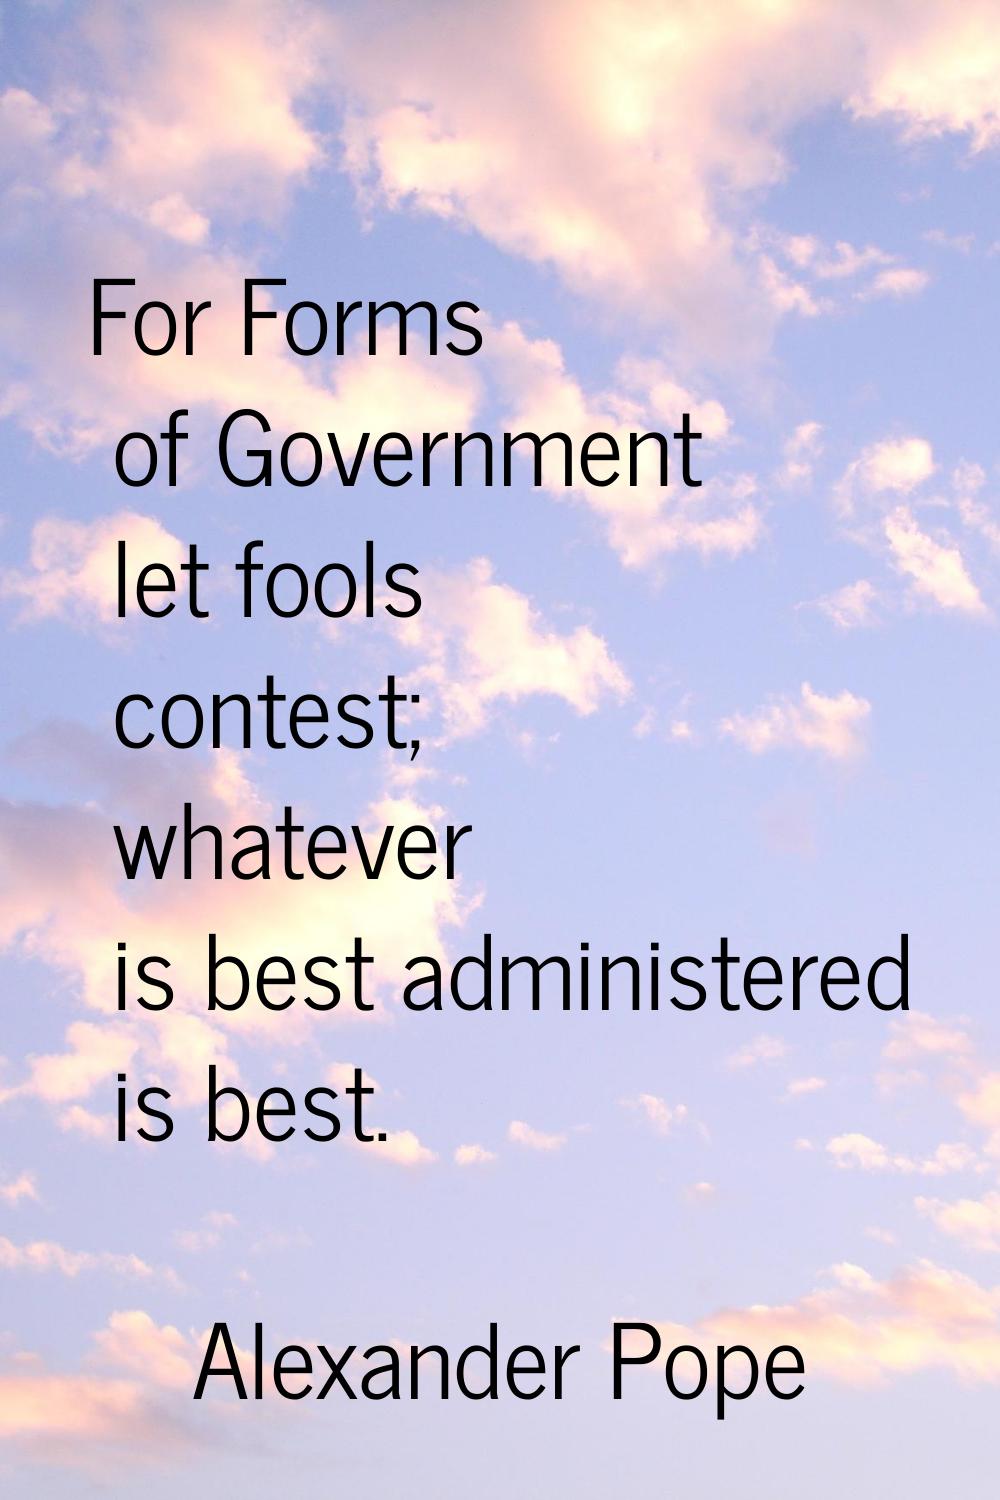 For Forms of Government let fools contest; whatever is best administered is best.